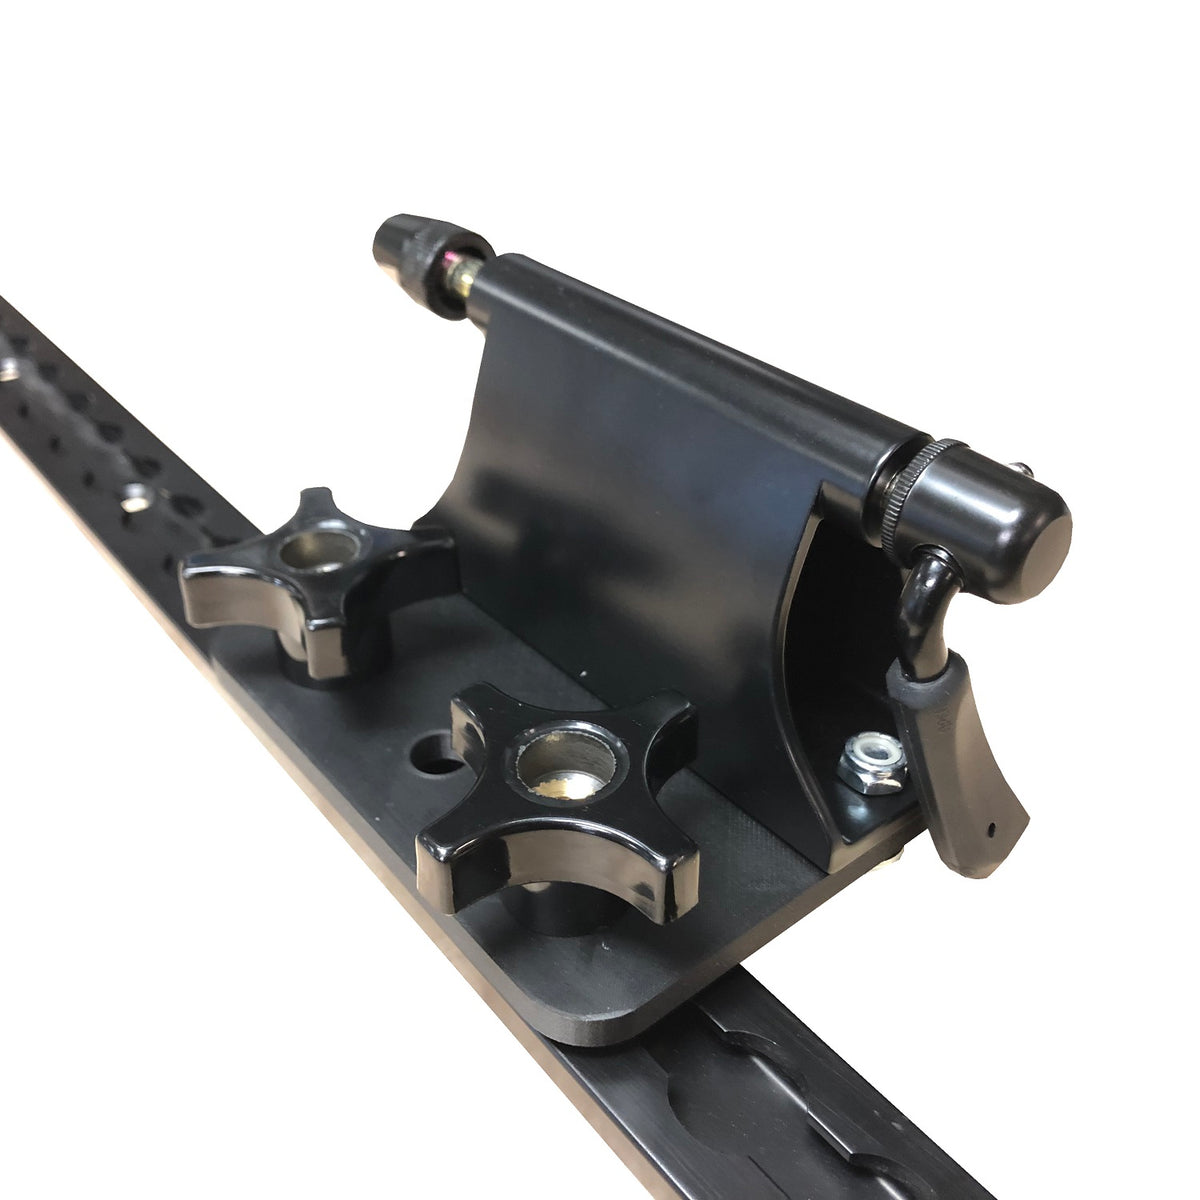 Rocky Mount Quick Release Axle - L-Track Mounting Kit